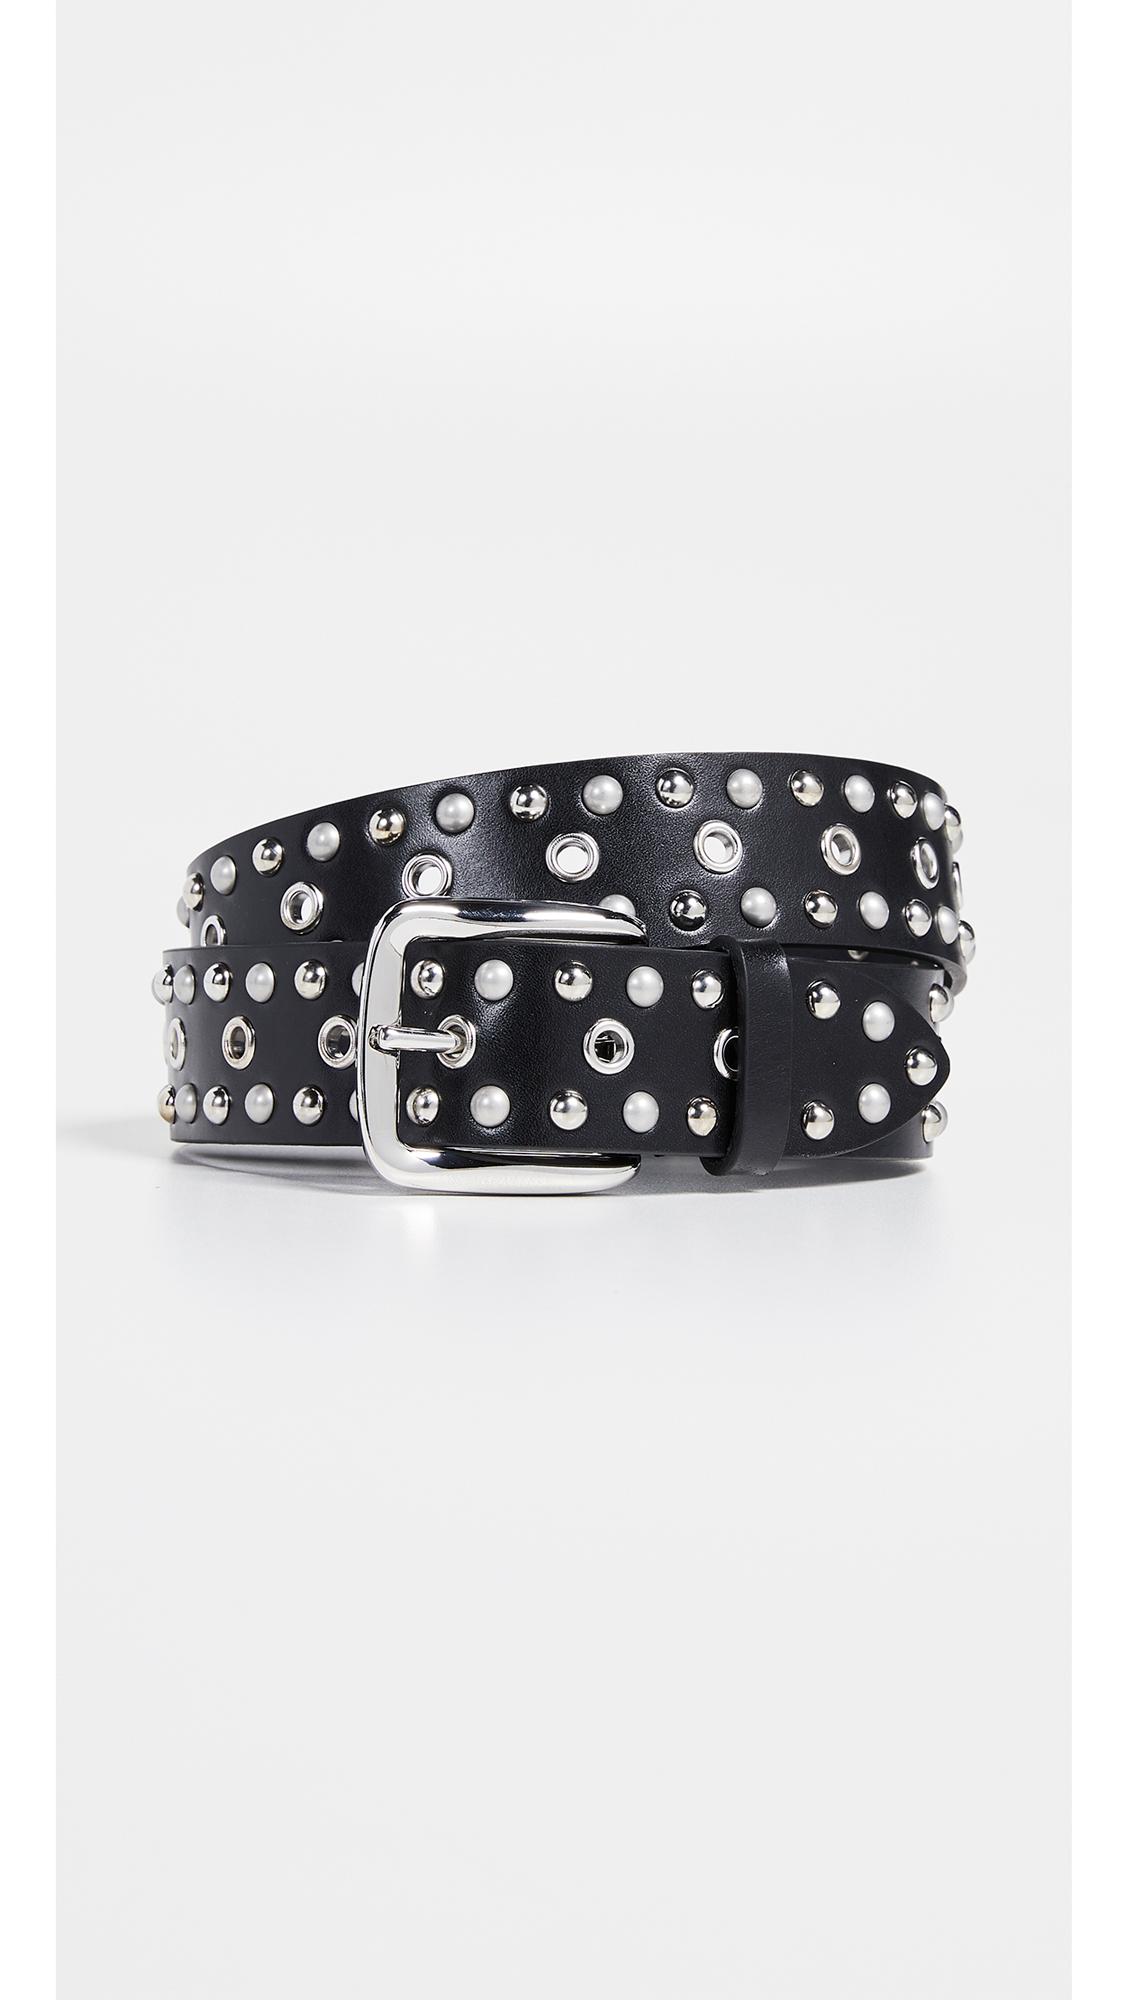 Isabel Marant Leather Rica Studded Belt in Black - Lyst